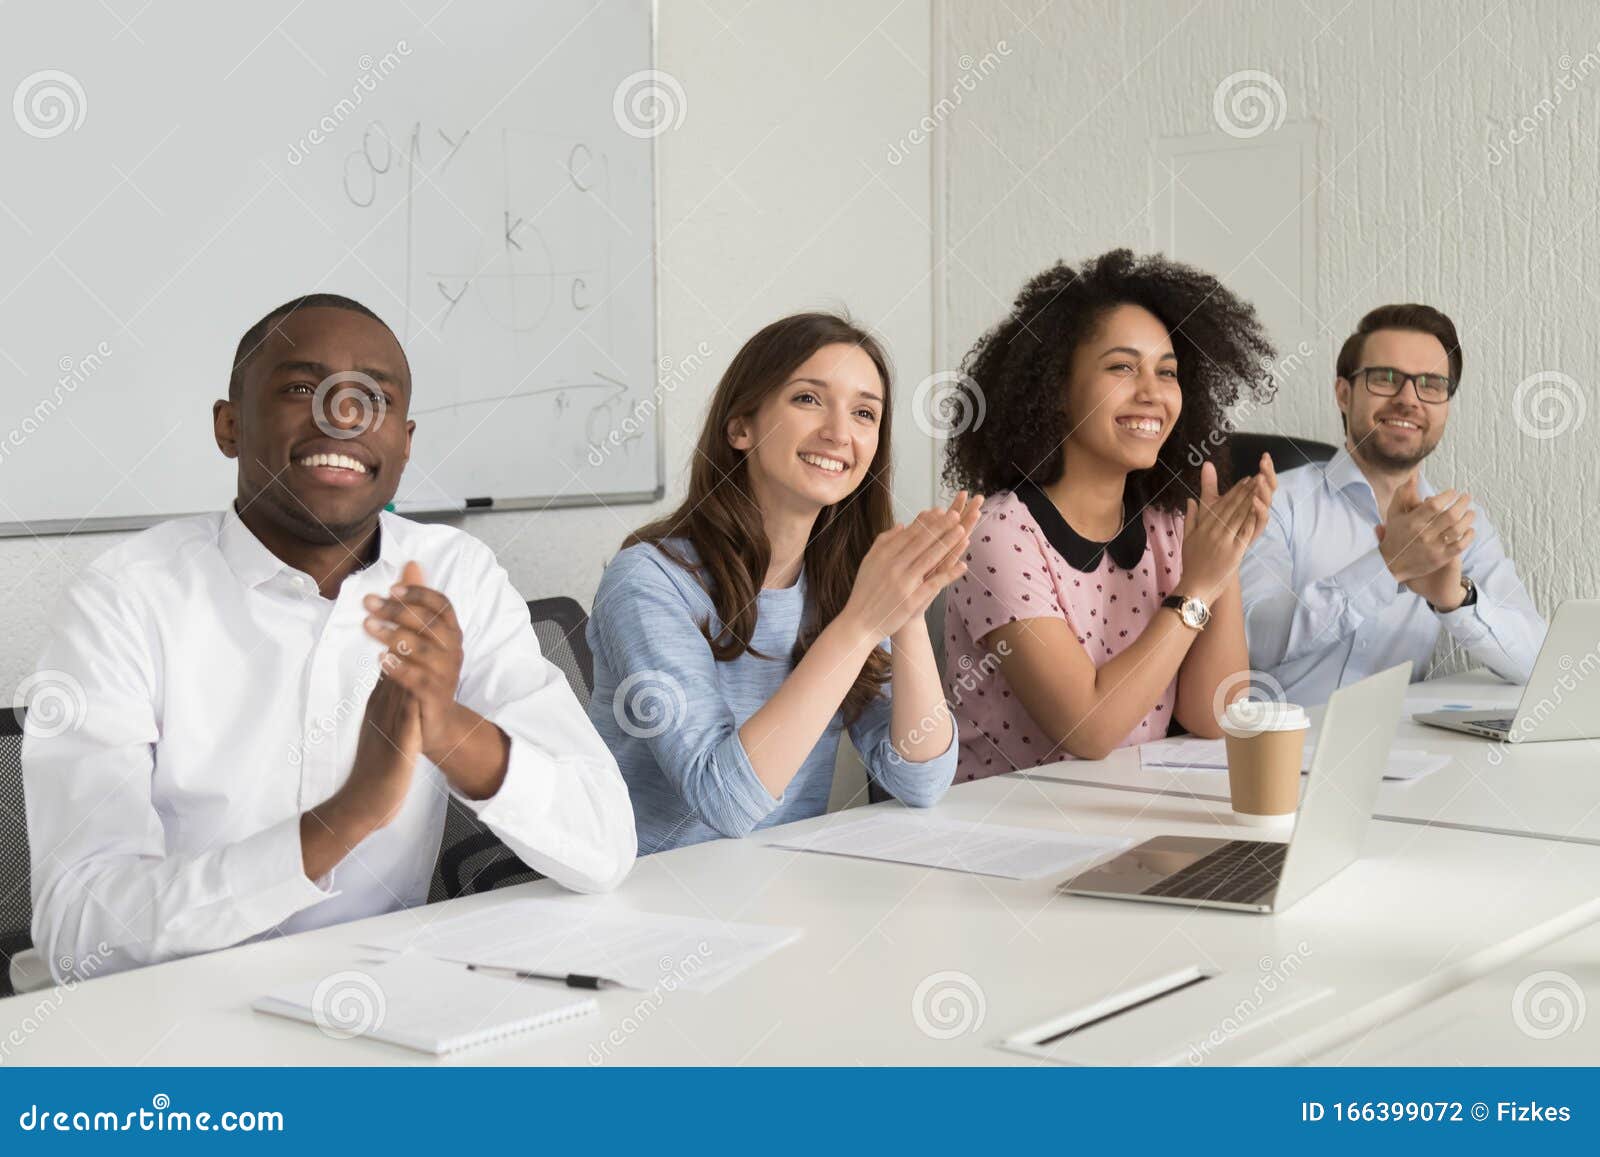 smiling diverse employees applaud thanking speaker for presentation